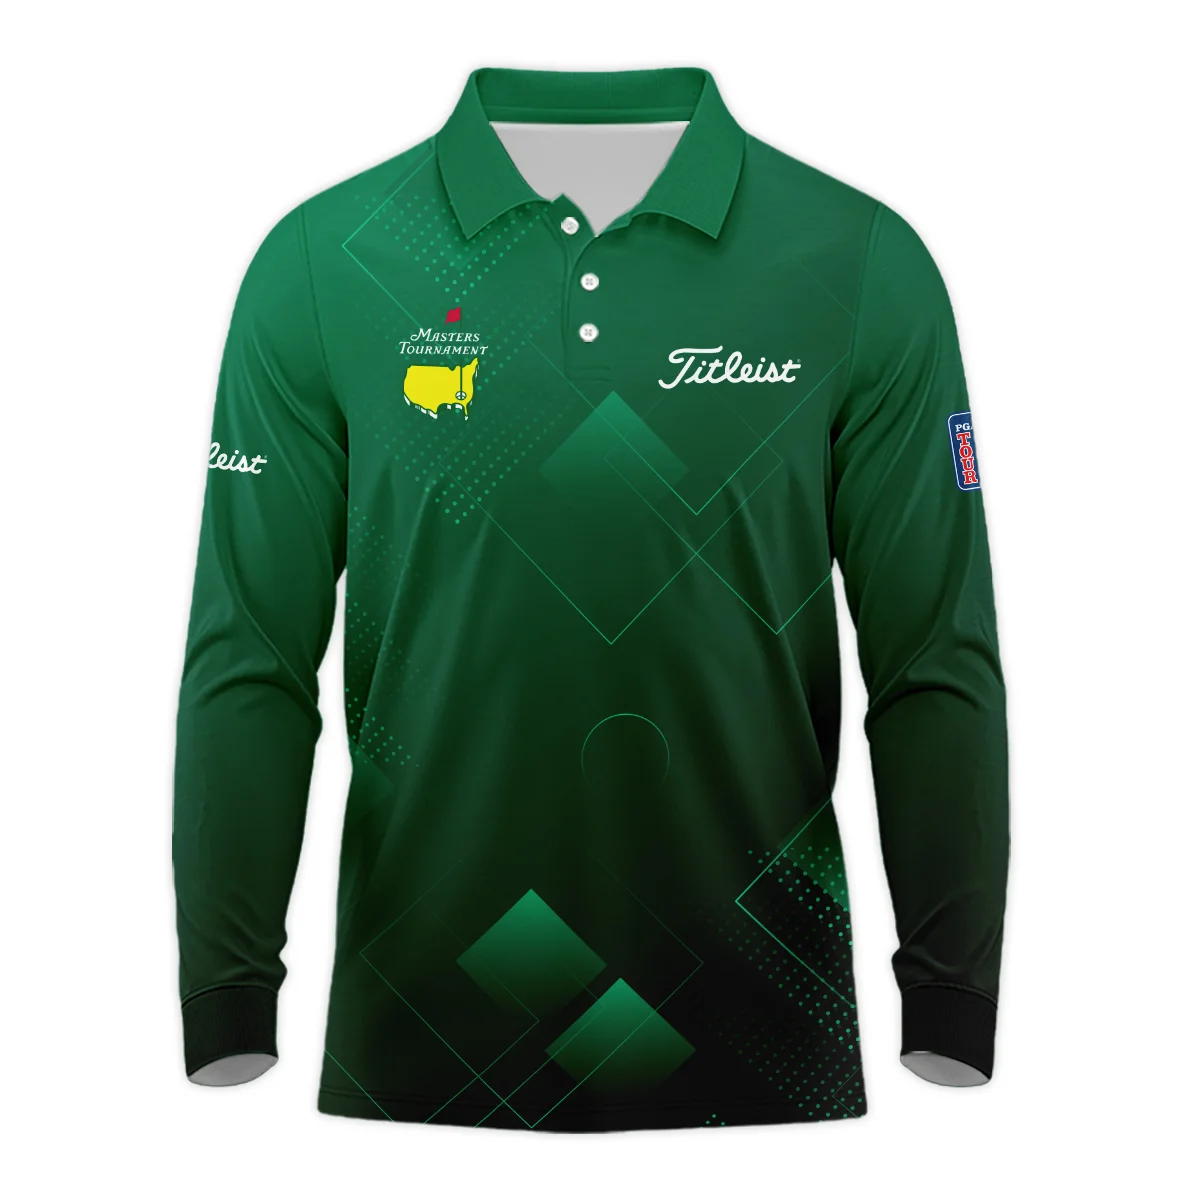 Masters Tournament Titleist Polo Shirt Golf Sports Green Abstract Geometric Polo Shirt For Men